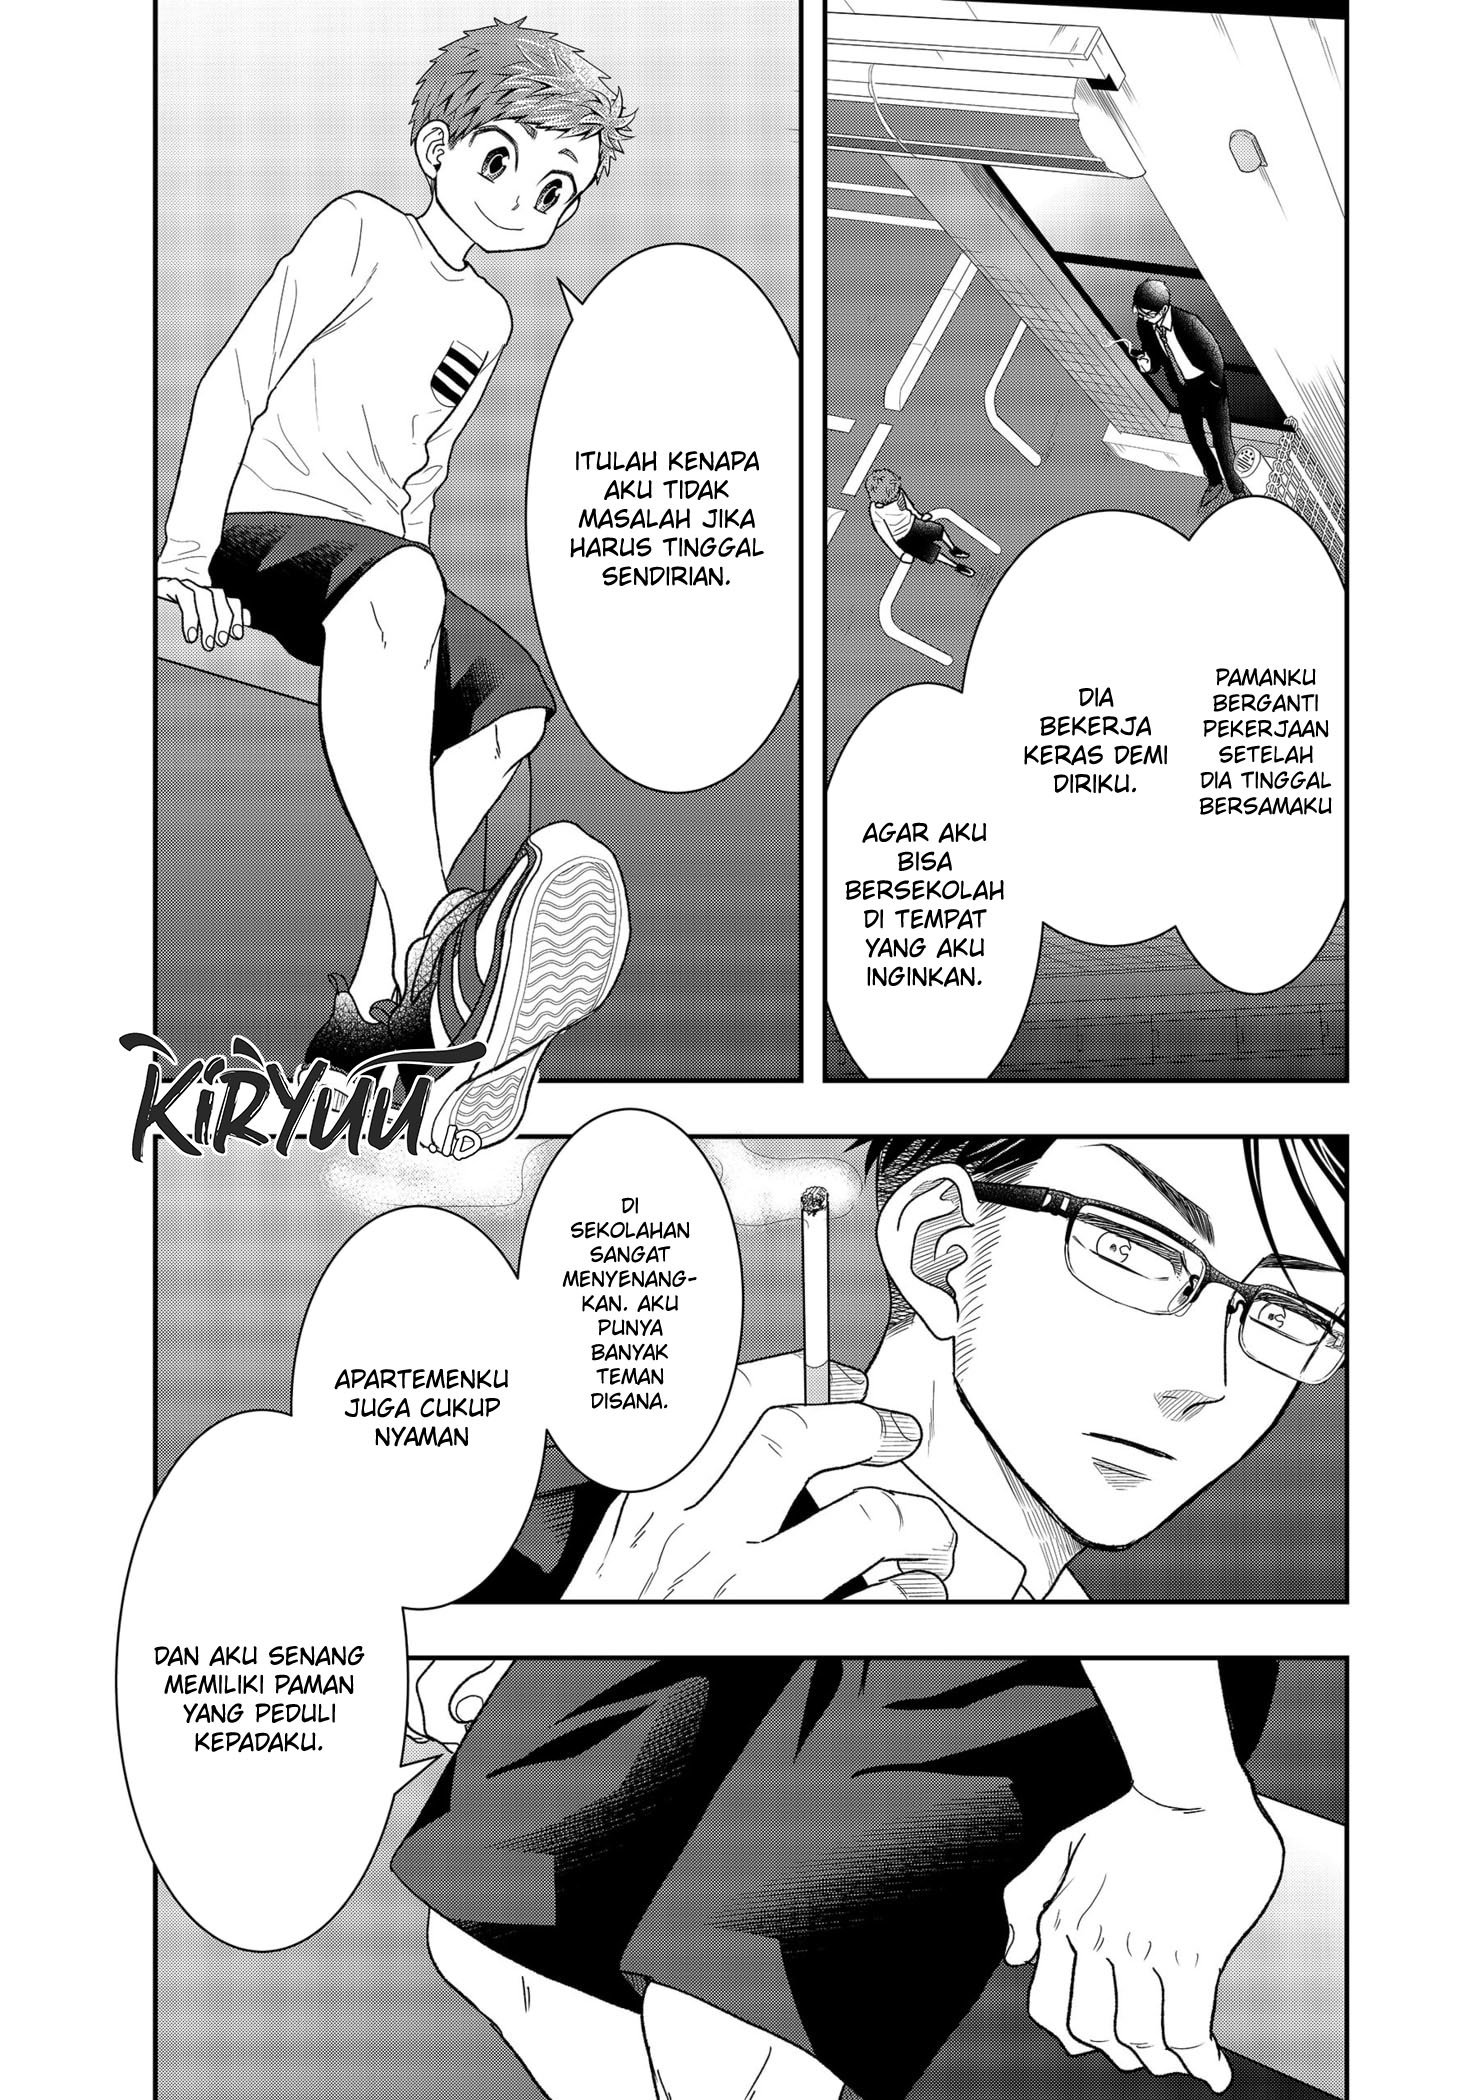 Me and My Gangster Neighbour Bahasa Indonesia Chapter 1.2